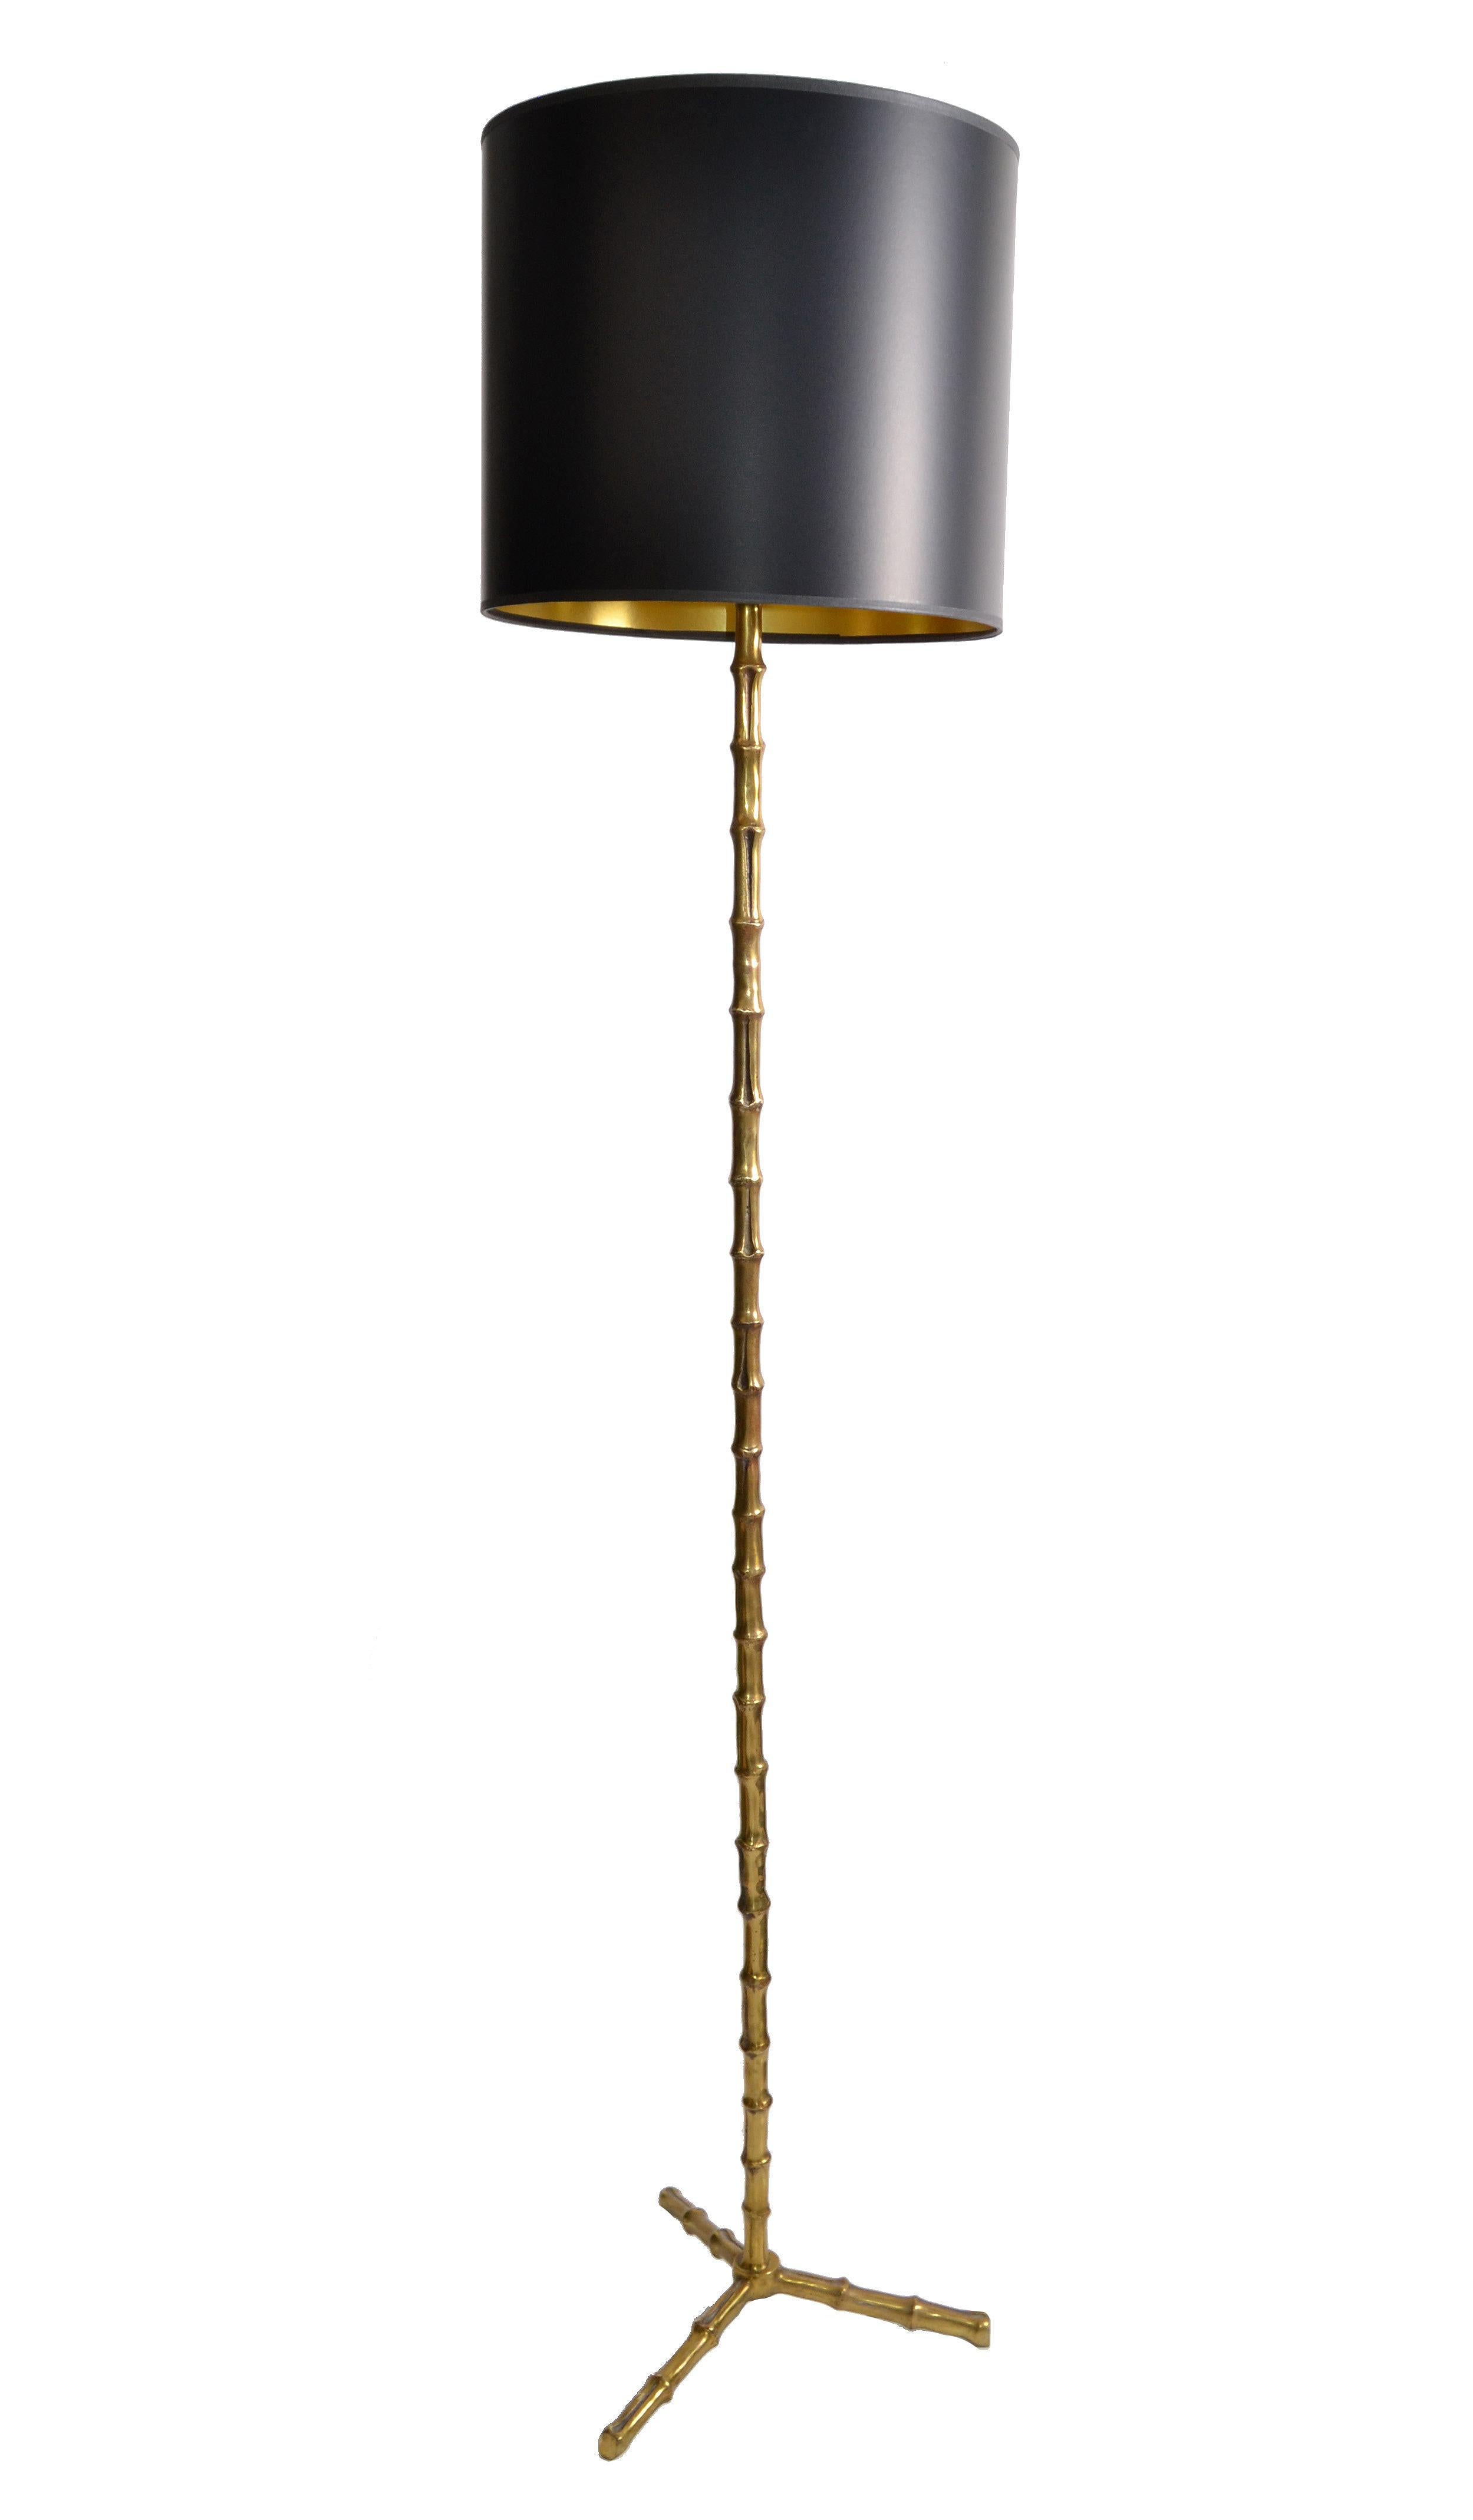 Original pair of Maison Baguès Classic and elegant Faux Bamboo style floor lamp with black & gold paper shade.
2 pairs available 
French Mid-Century Modern made in the late 1950s.
European wiring with foot-switch and cold fabric cord.
Takes a